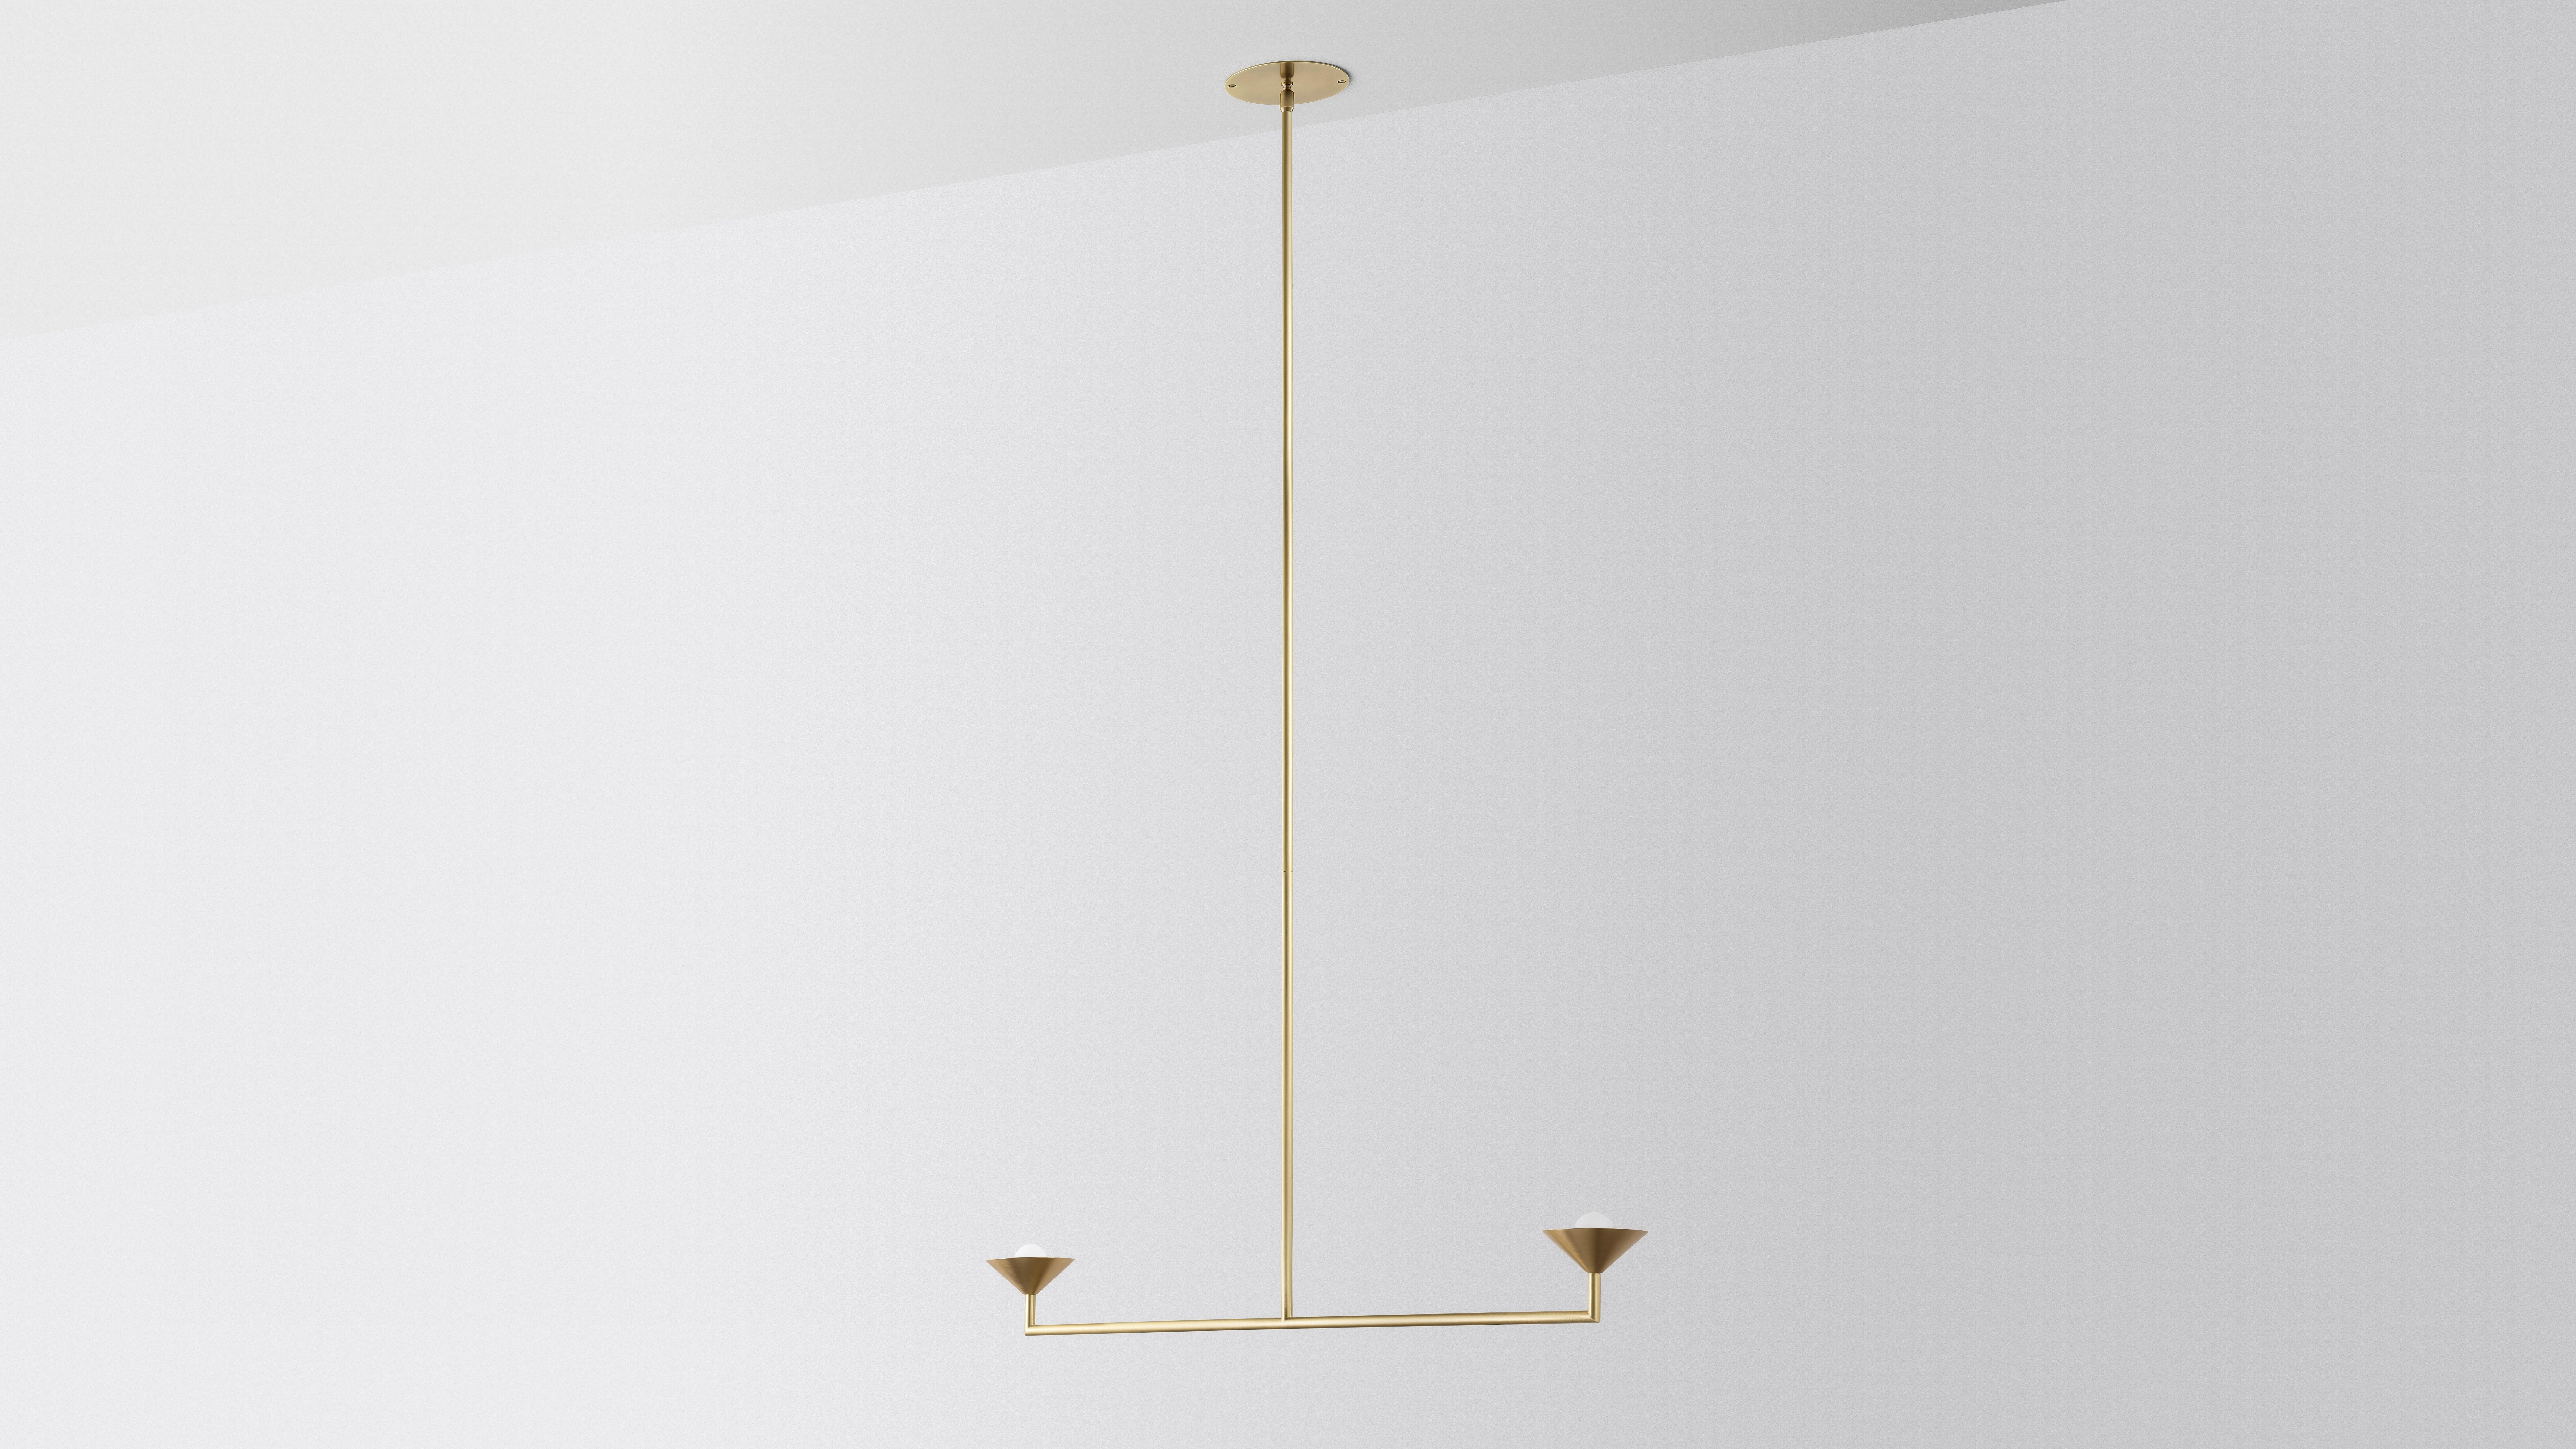 Double drop by Volker Haug.
Pyramid scheme series.
Dimensions: W 90.5, D 15 H 70 cm.
Support: 15 cm.
Suspension: min 70 cm.
Material: Brass.
Finishes: Polished, brushed or bronzed brass, enamel or chrome-plated.
Custom finishes available on